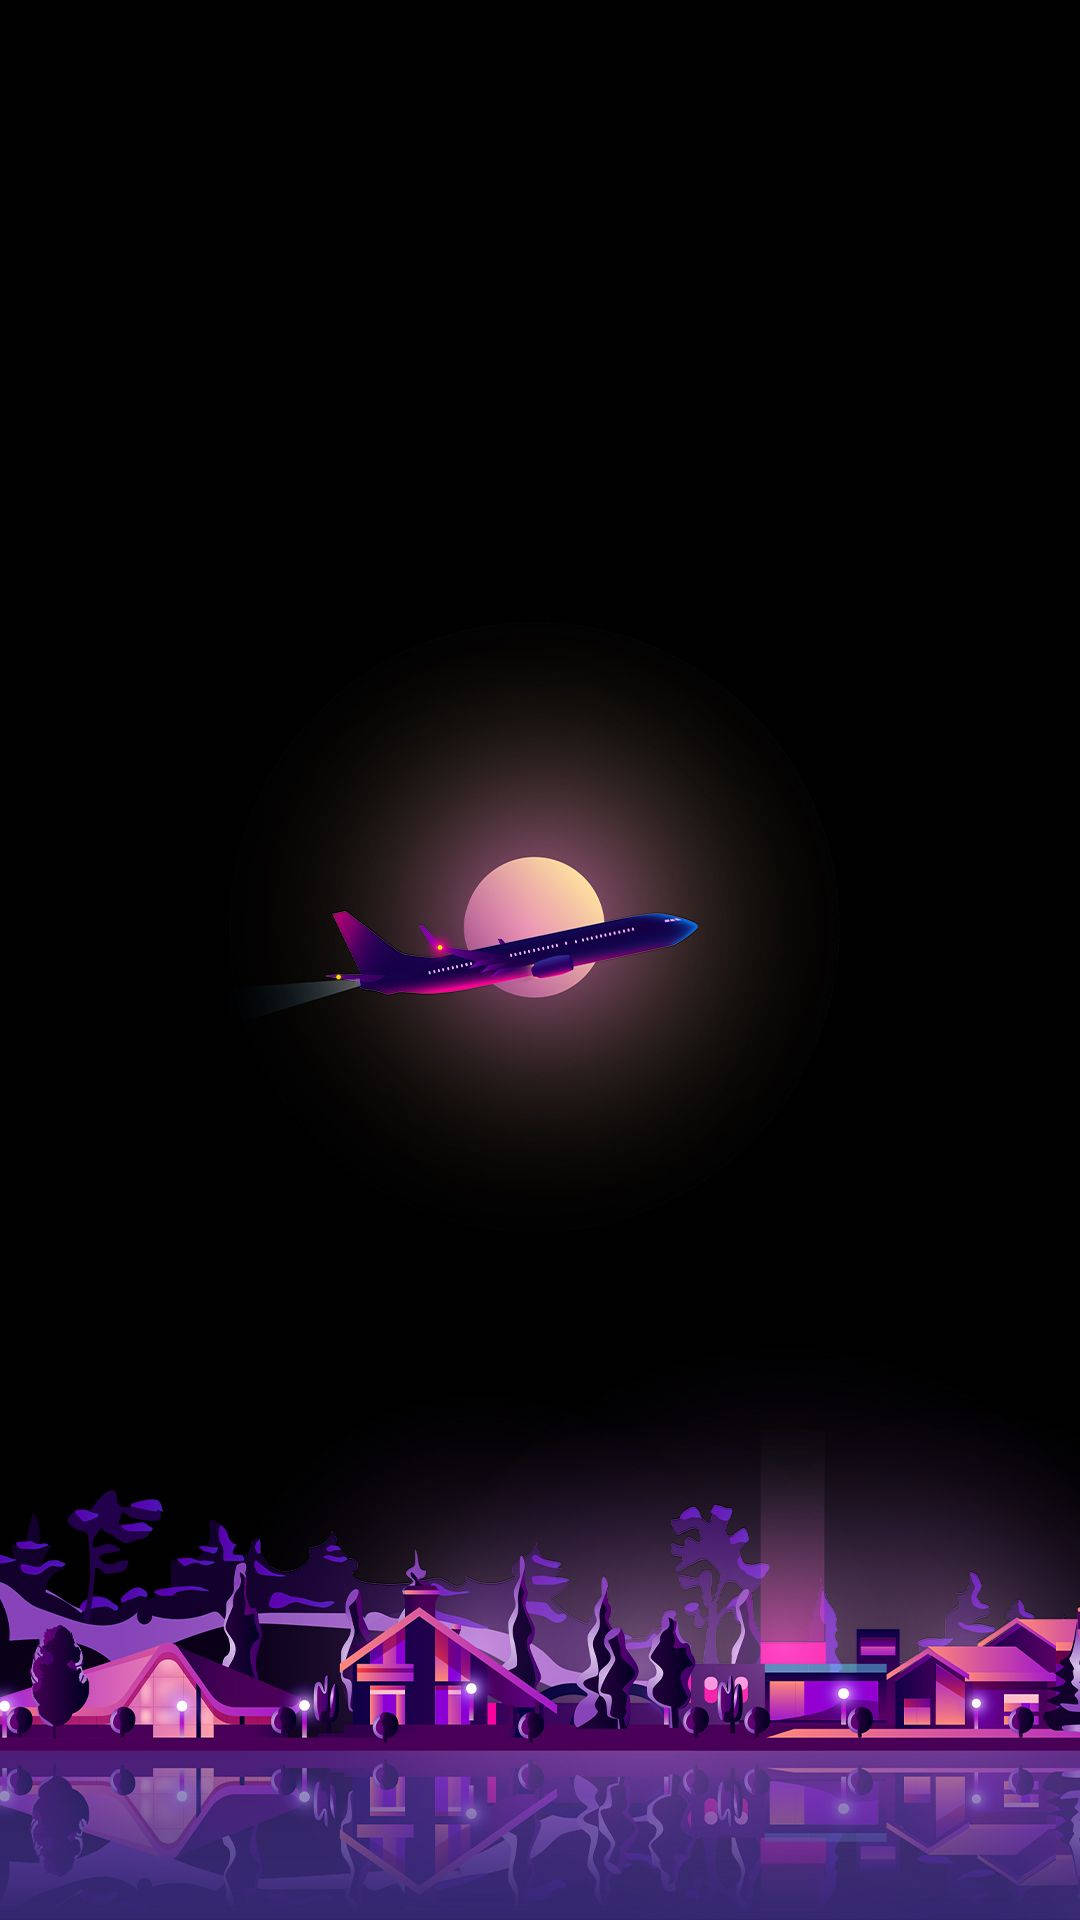 Amoled Android Wallpaper